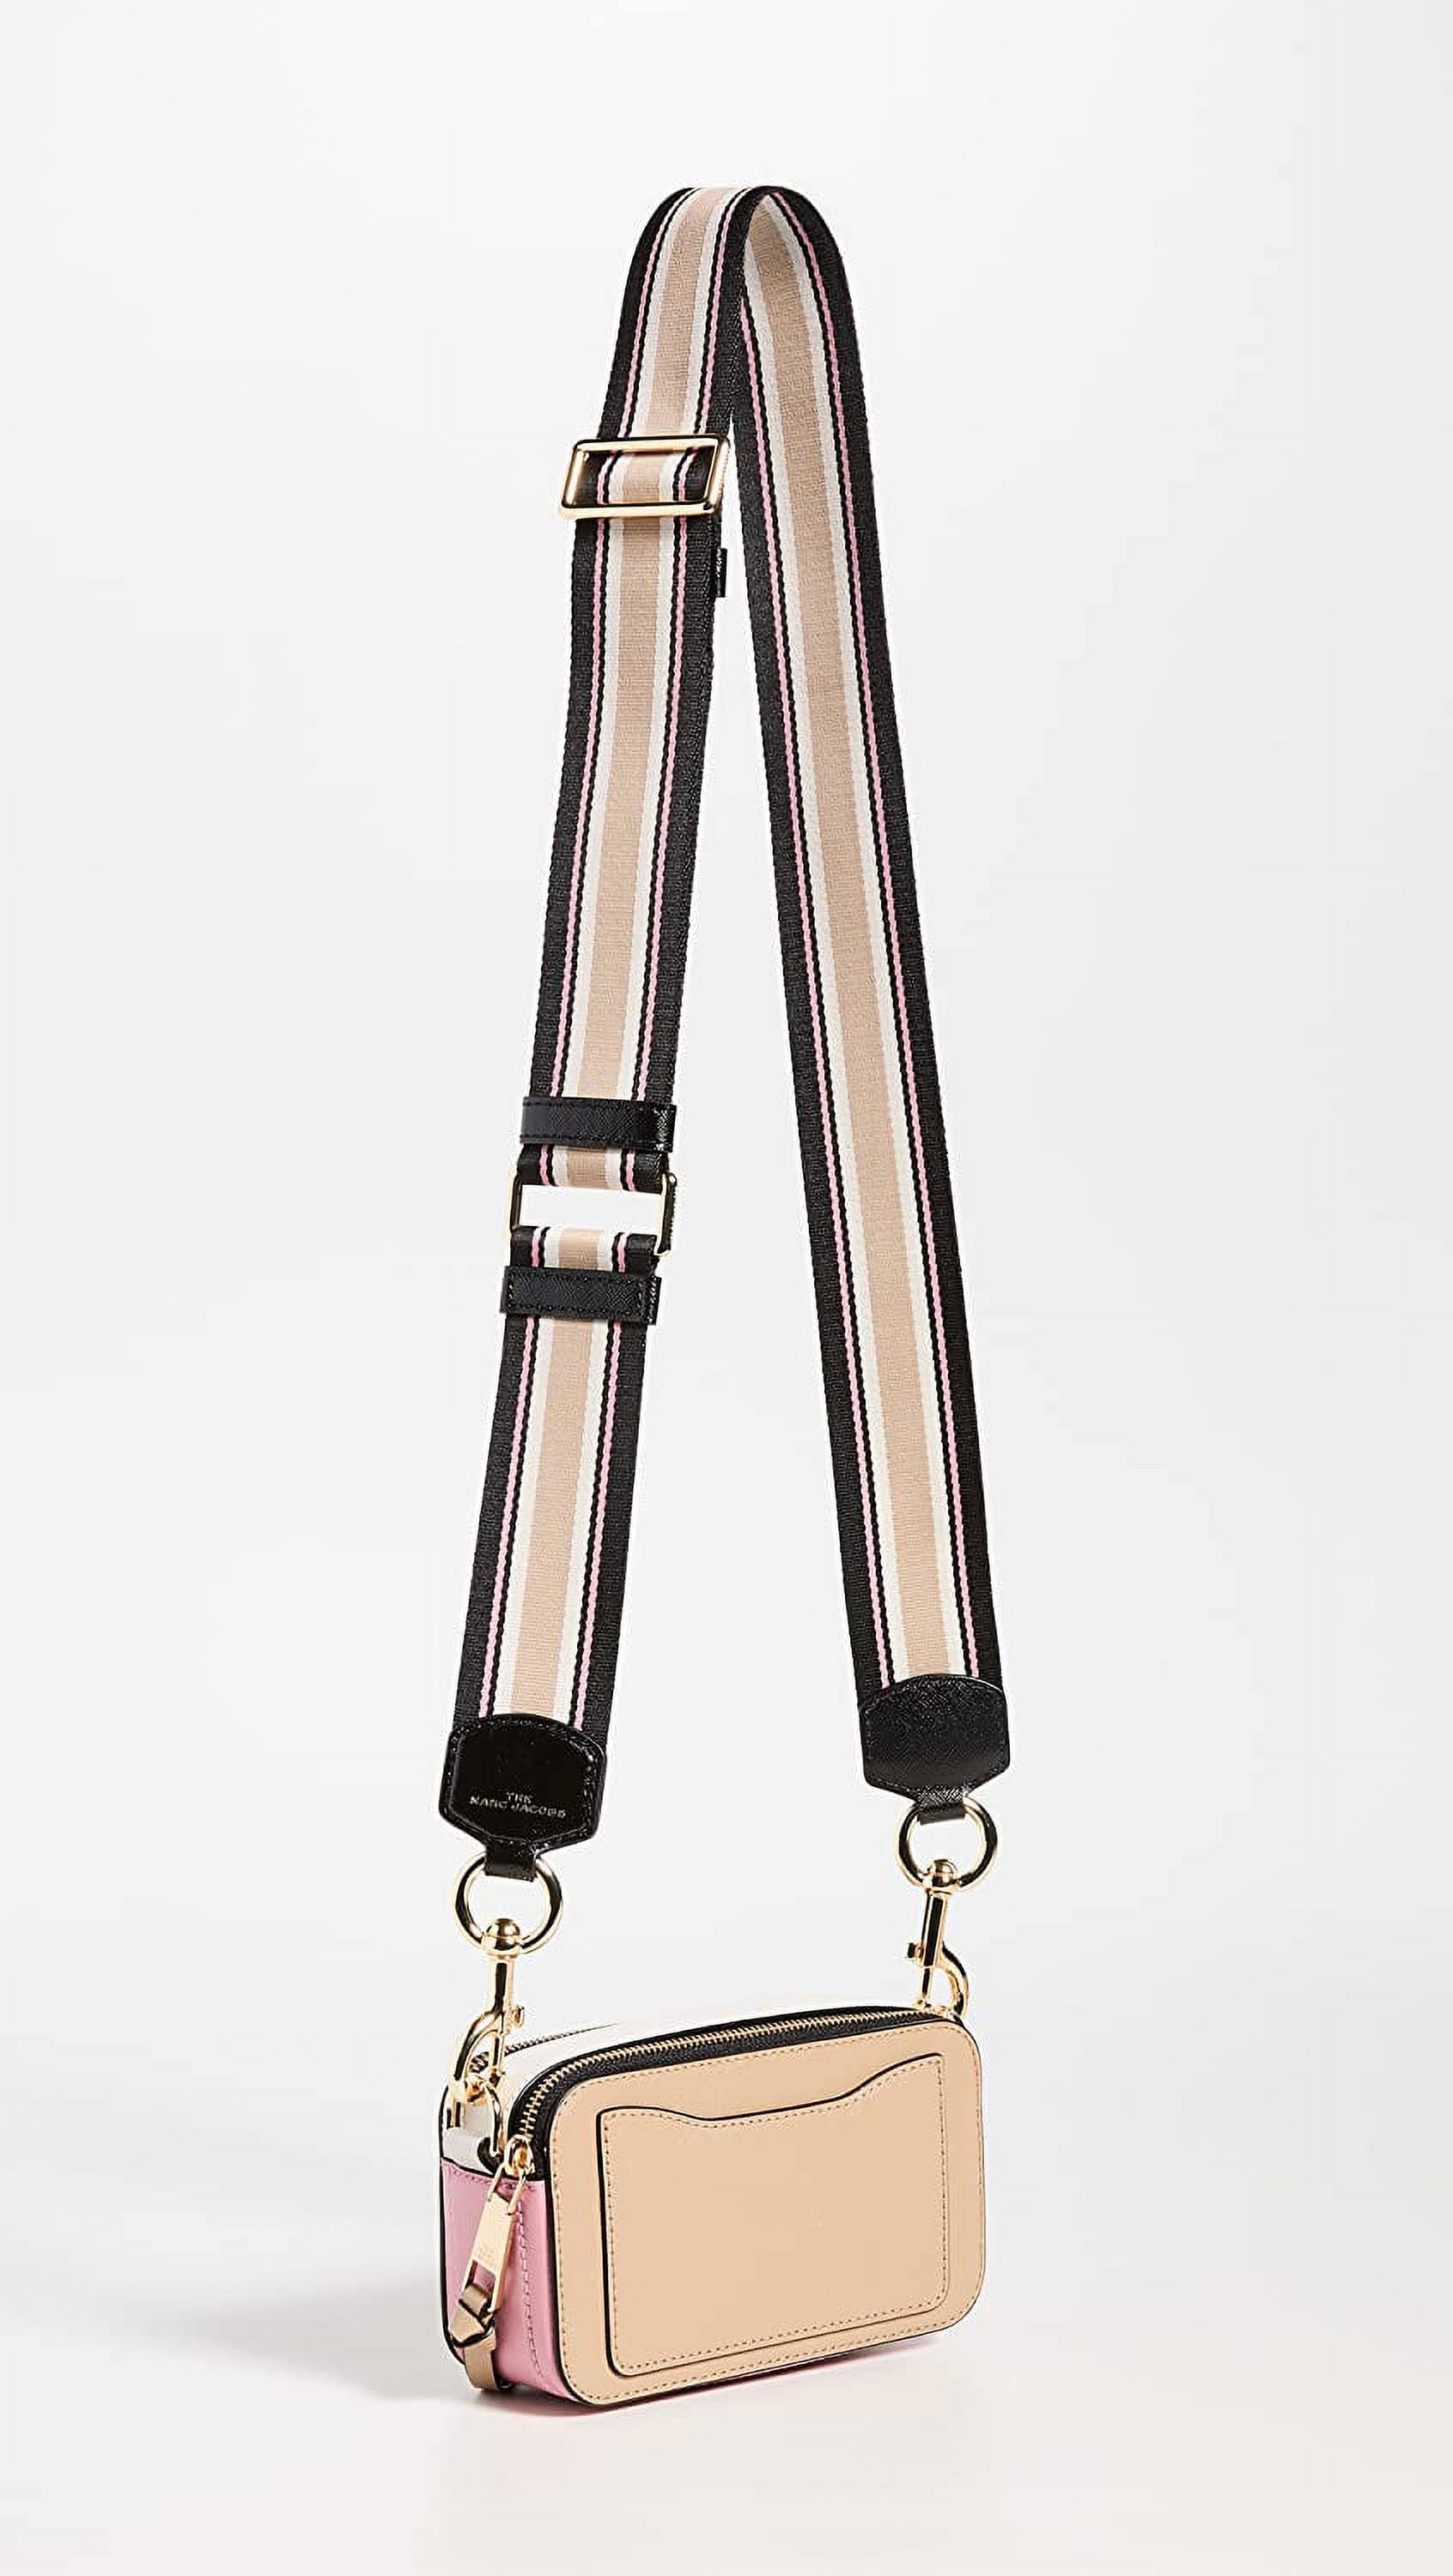 Marc Jacobs The Snapshot Gilded Leather Cross-body Bag - Black